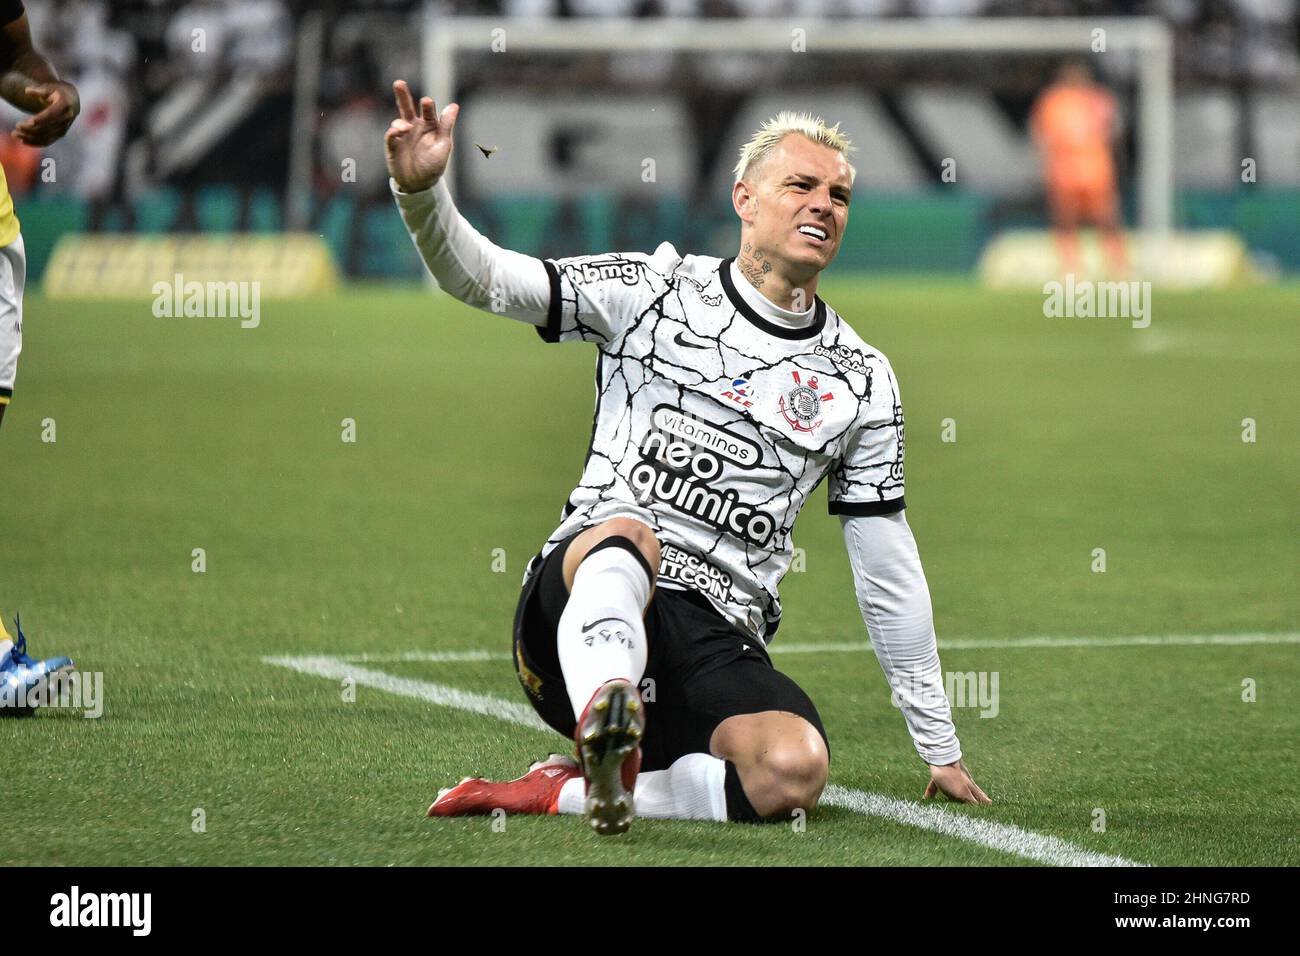 SÃO PAULO, SP - 02.05.2018: CORINTHIANS X INDEPENDIENTE - Silvio Romero do  Independiente is playing for Corinthians FC during a match between  Corinthians and Club Atlético Independiente (Argentina), which is valid for